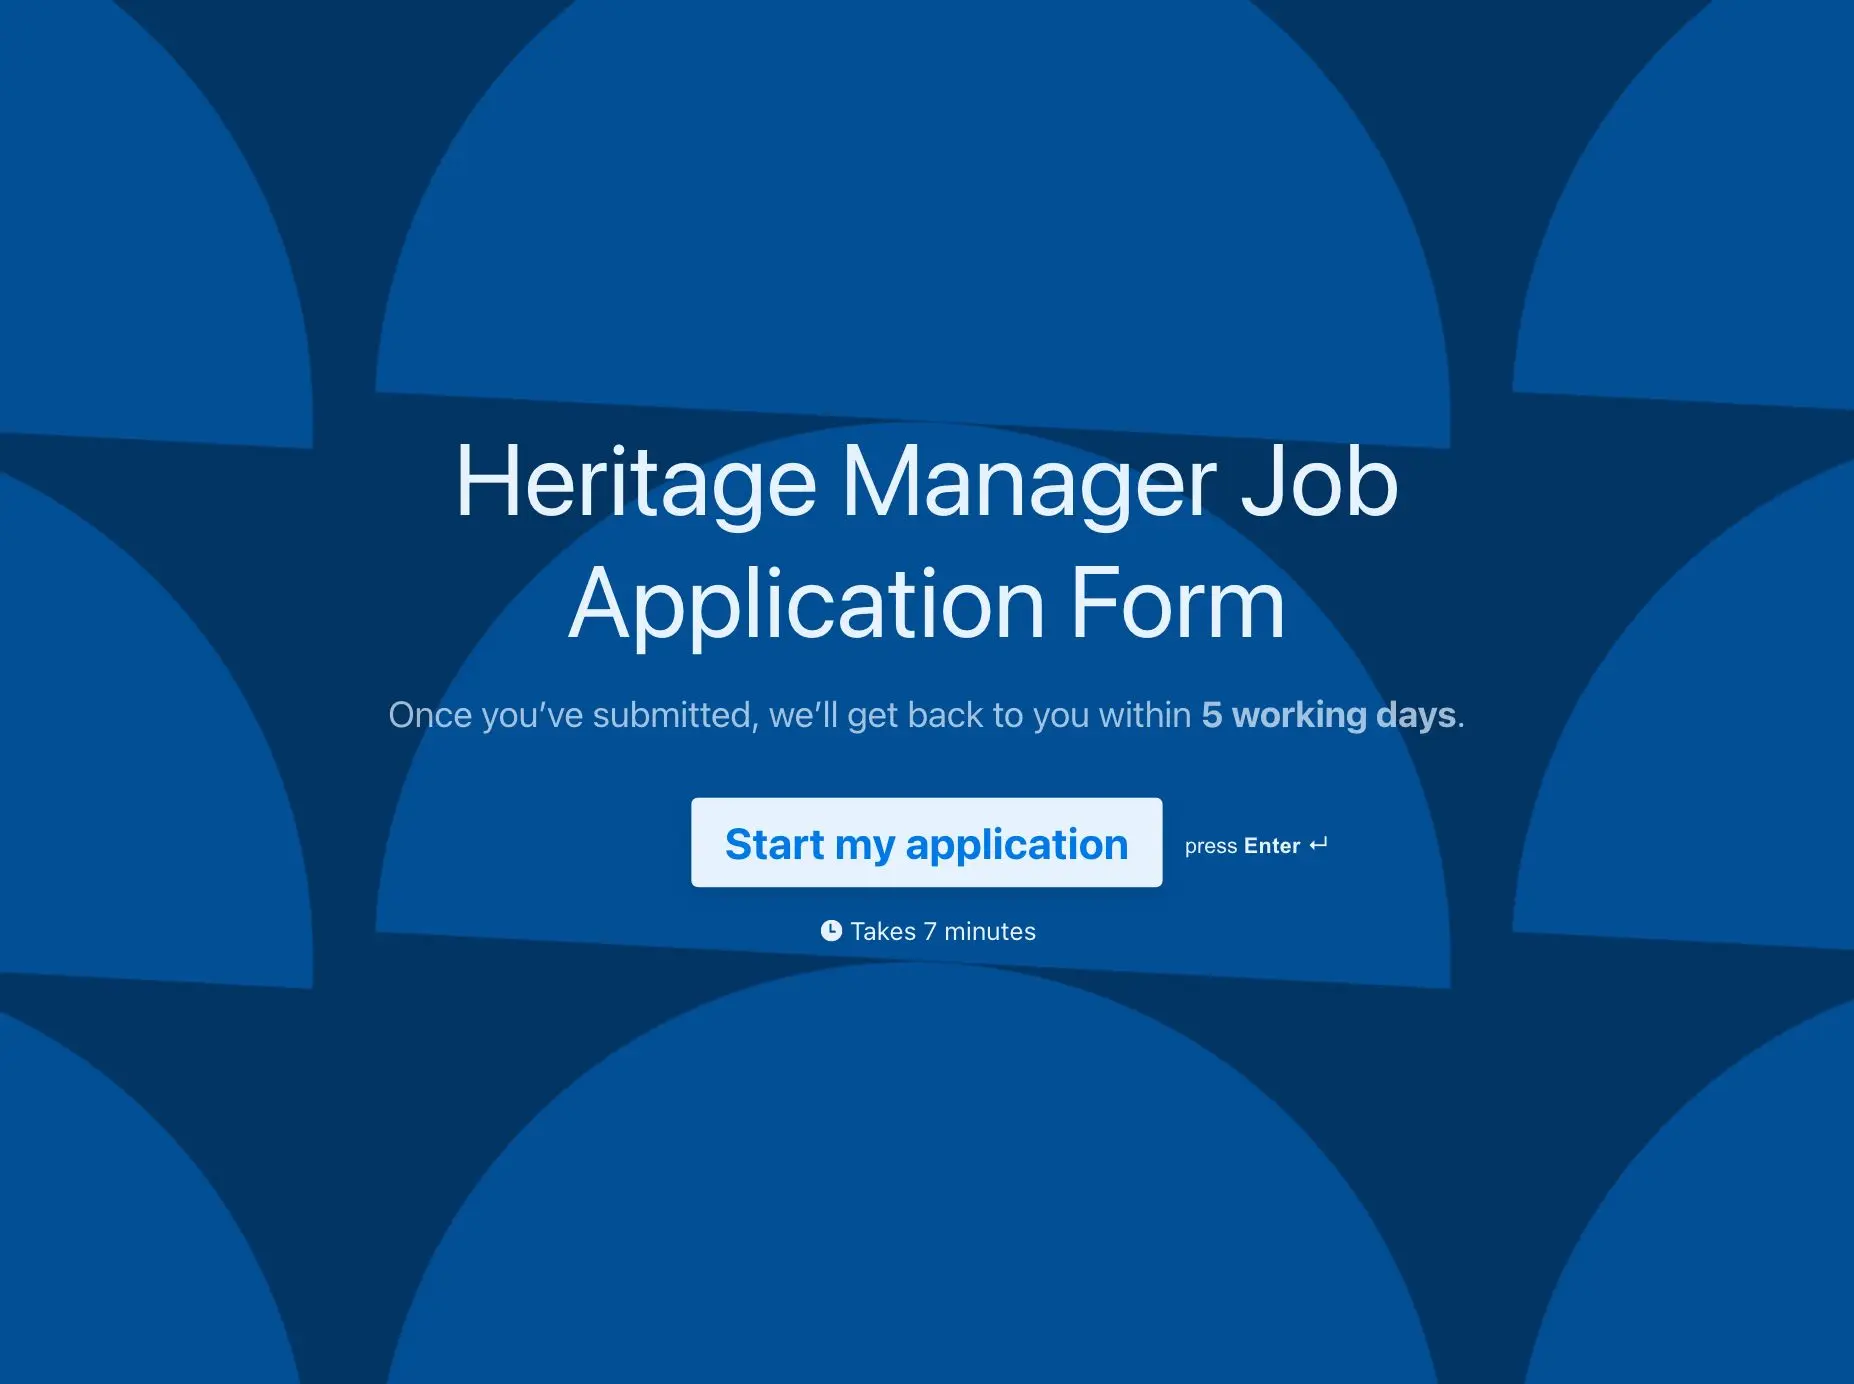 Heritage Manager Job Application Form Template Hero